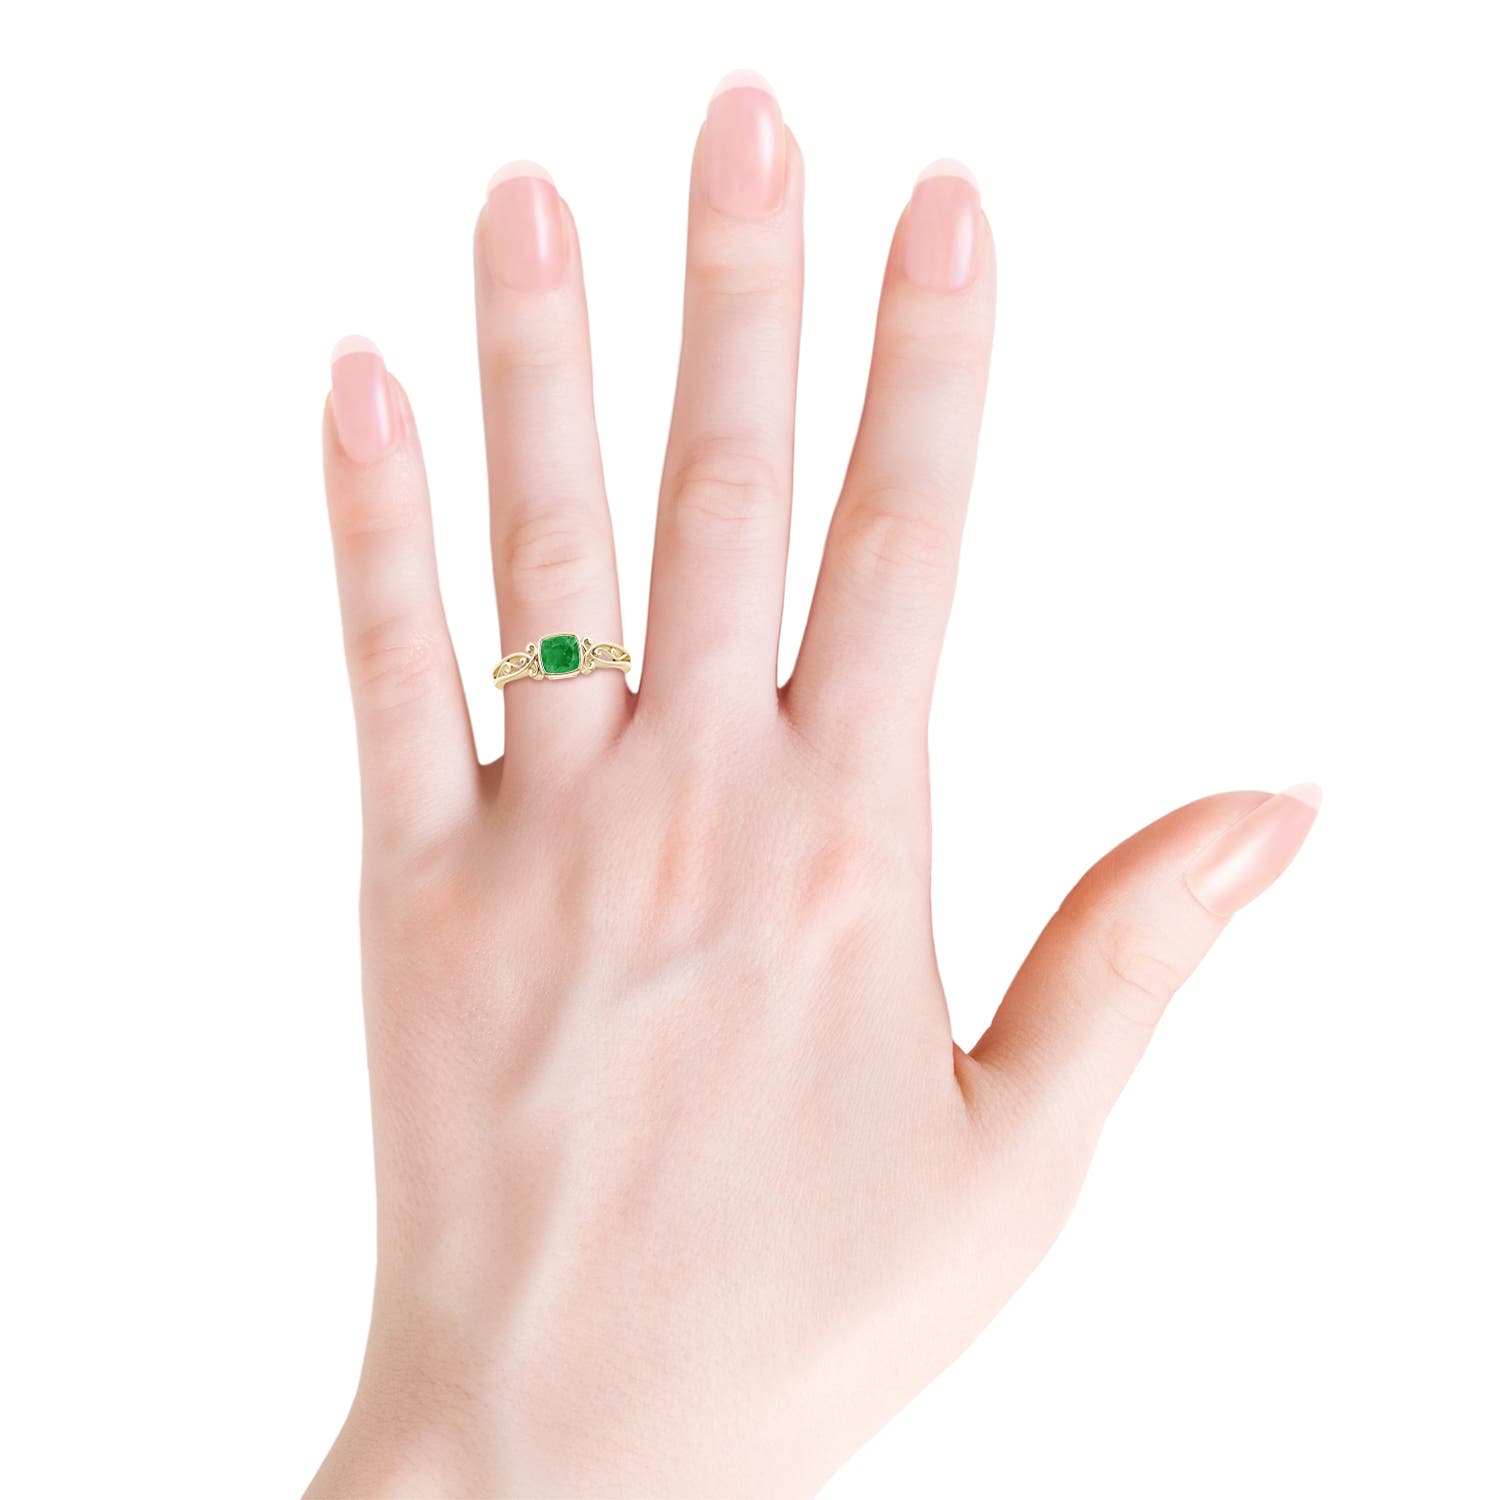 A - Emerald / 0.55 CT / 14 KT Yellow Gold